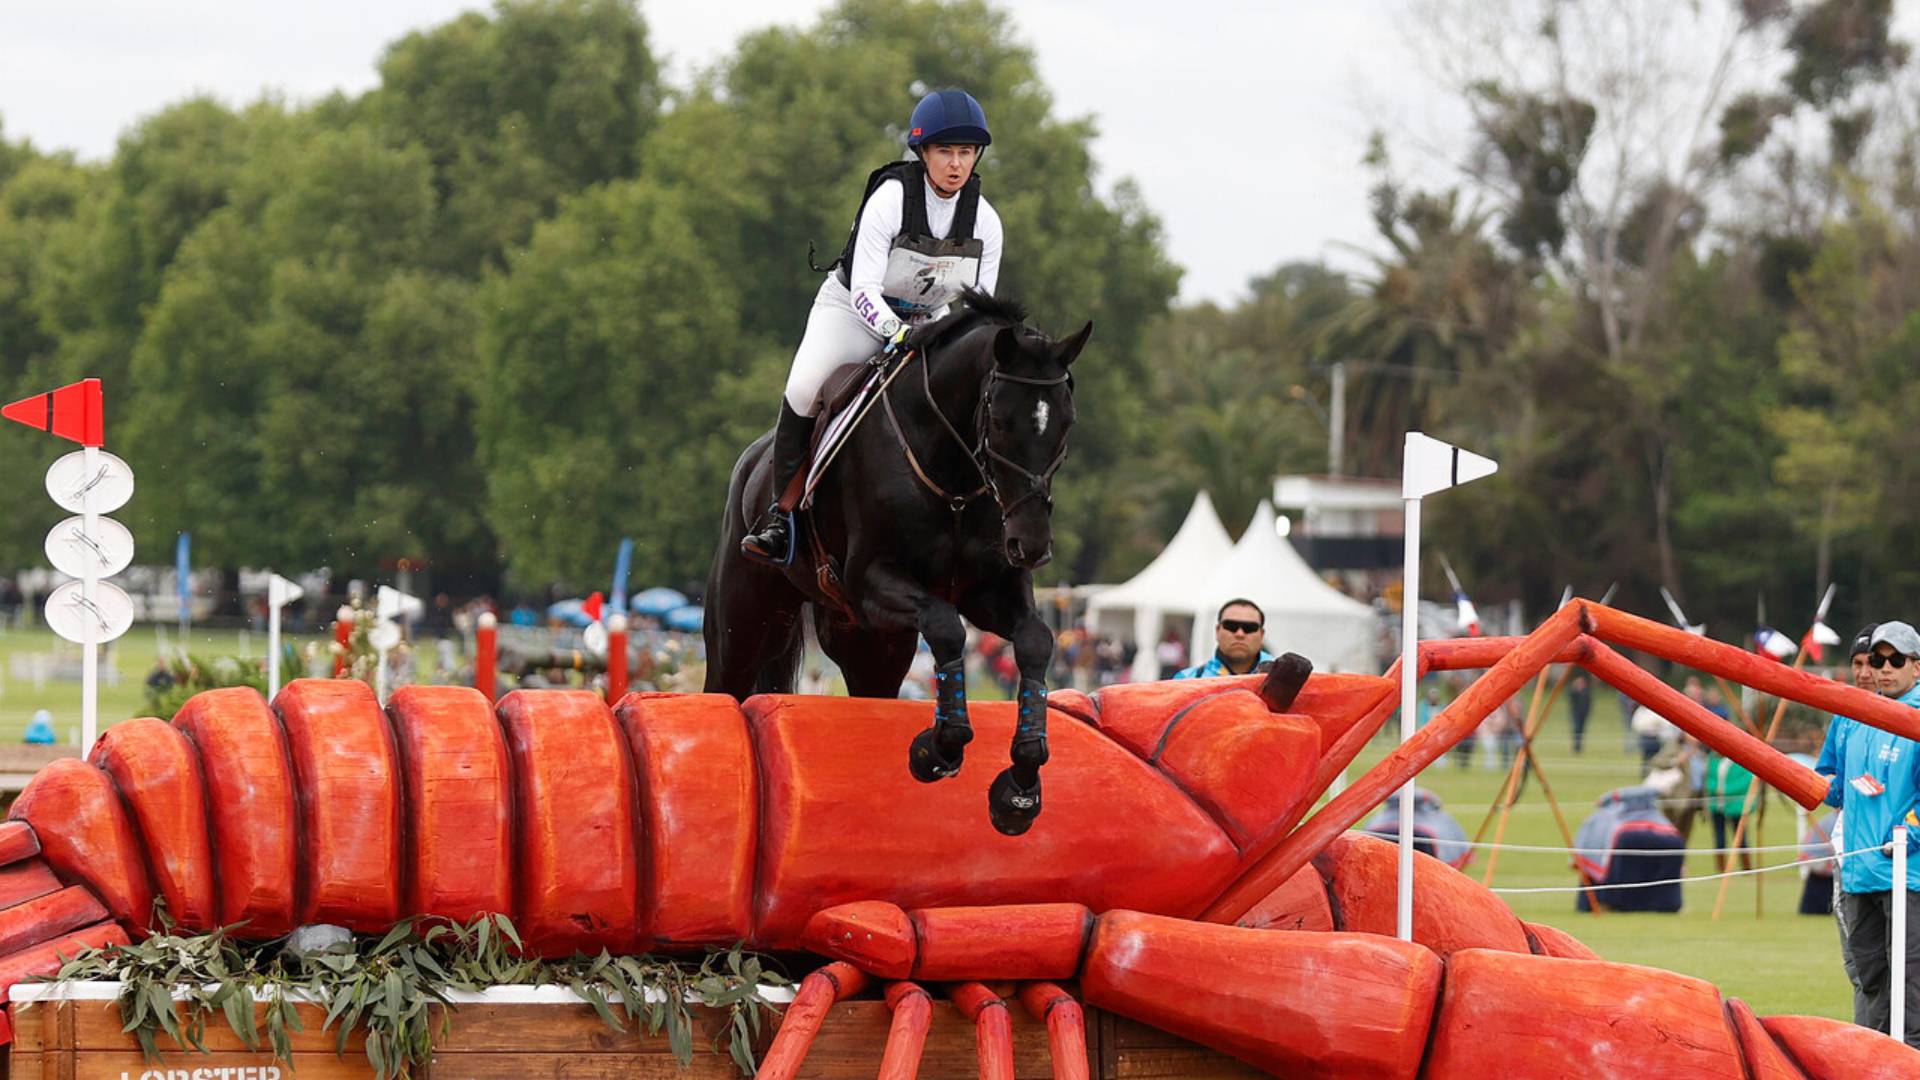 The United States goes for gold in Eventing Equestrian competition